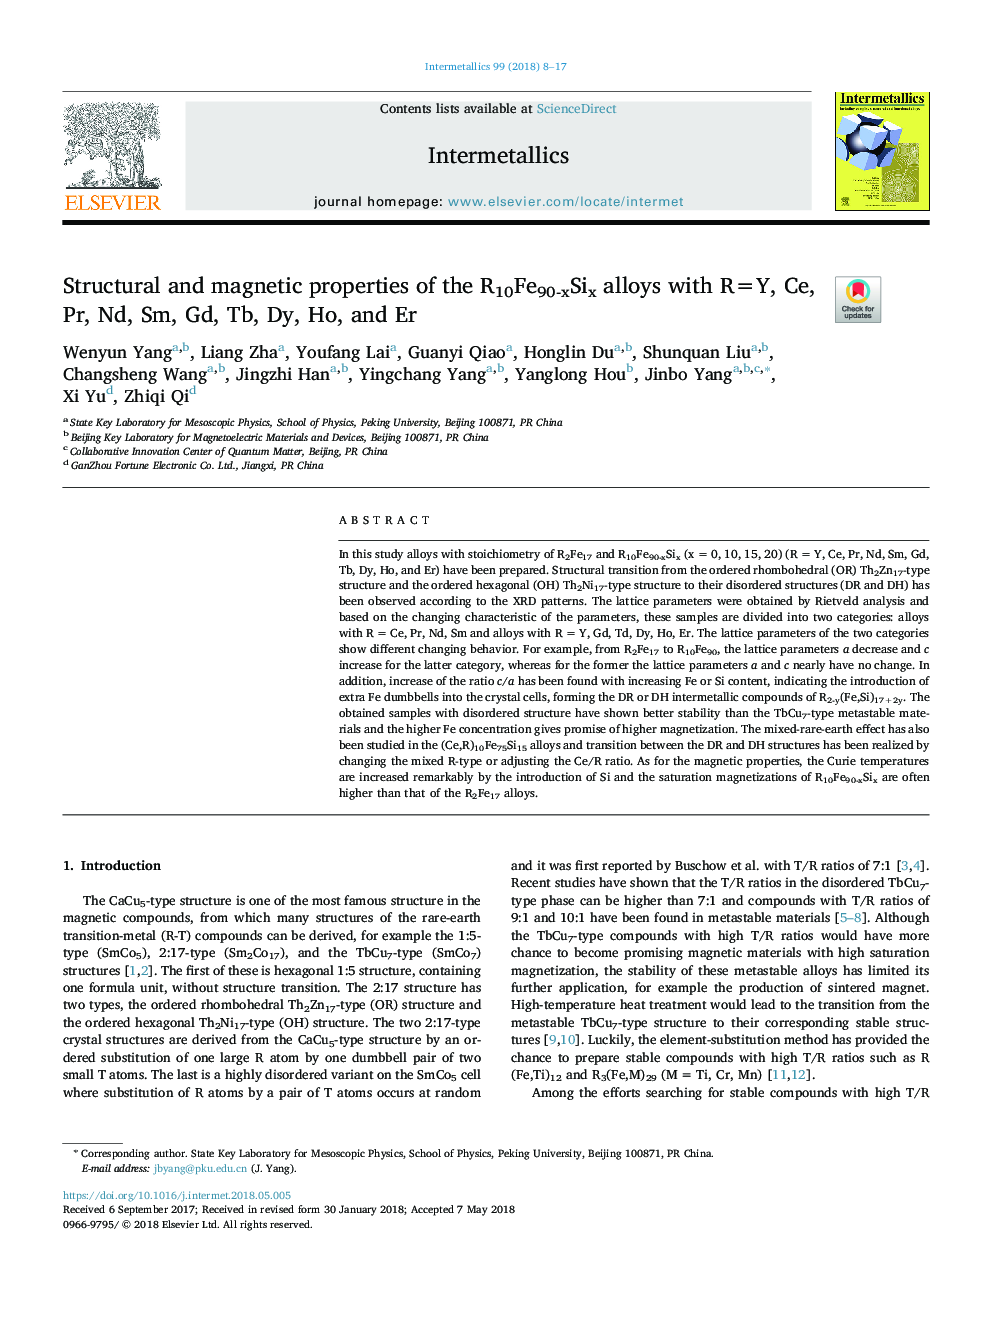 Structural and magnetic properties of the R10Fe90-xSix alloys with R=Y, Ce, Pr, Nd, Sm, Gd, Tb, Dy, Ho, and Er